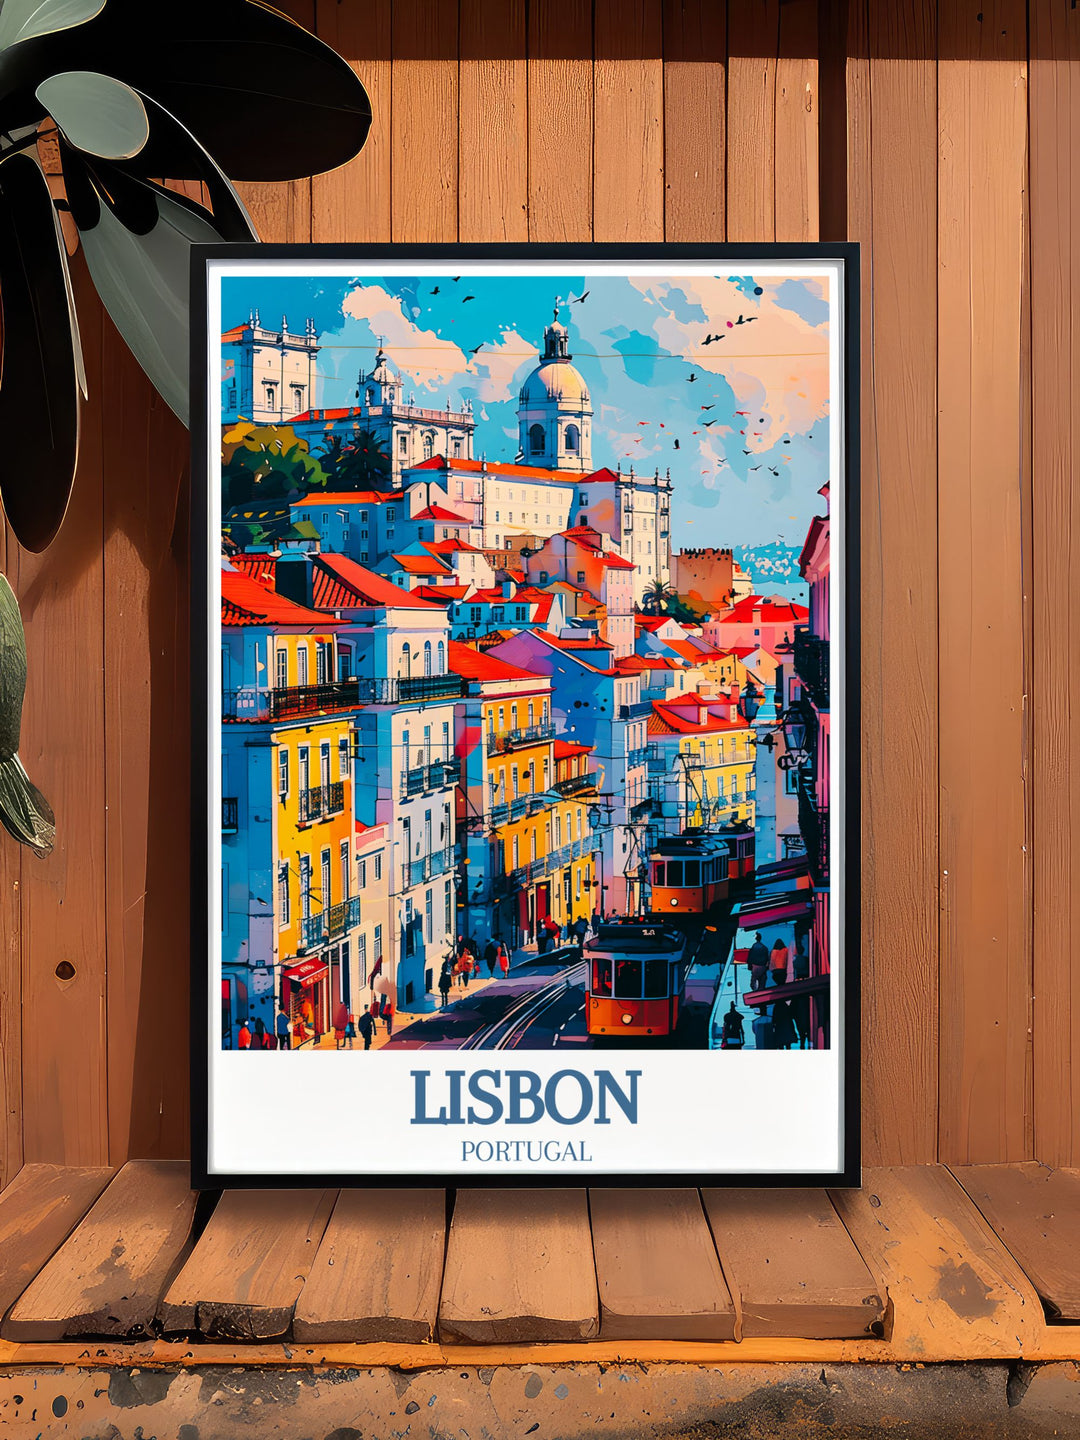 Add sophistication to your decor with our Lisbon Travel Print featuring the iconic Chiado District Santa Justa Lift a stunning piece of modern art that captures the essence of Portugal’s rich cultural heritage